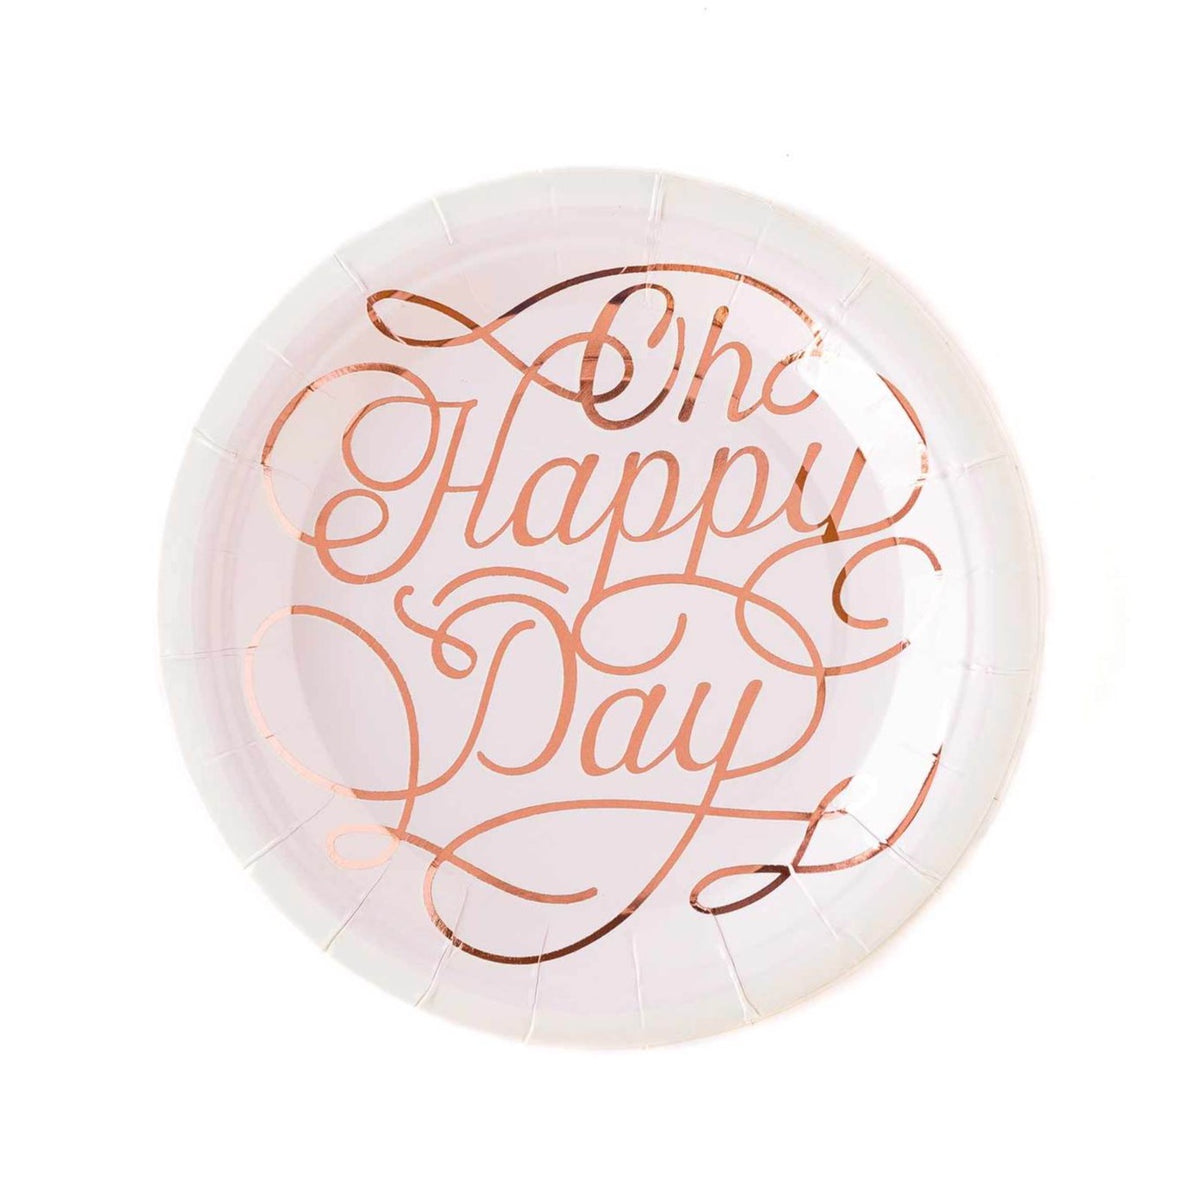 Way to Celebrate! White Paper Dessert Plates, 7in, 24ct